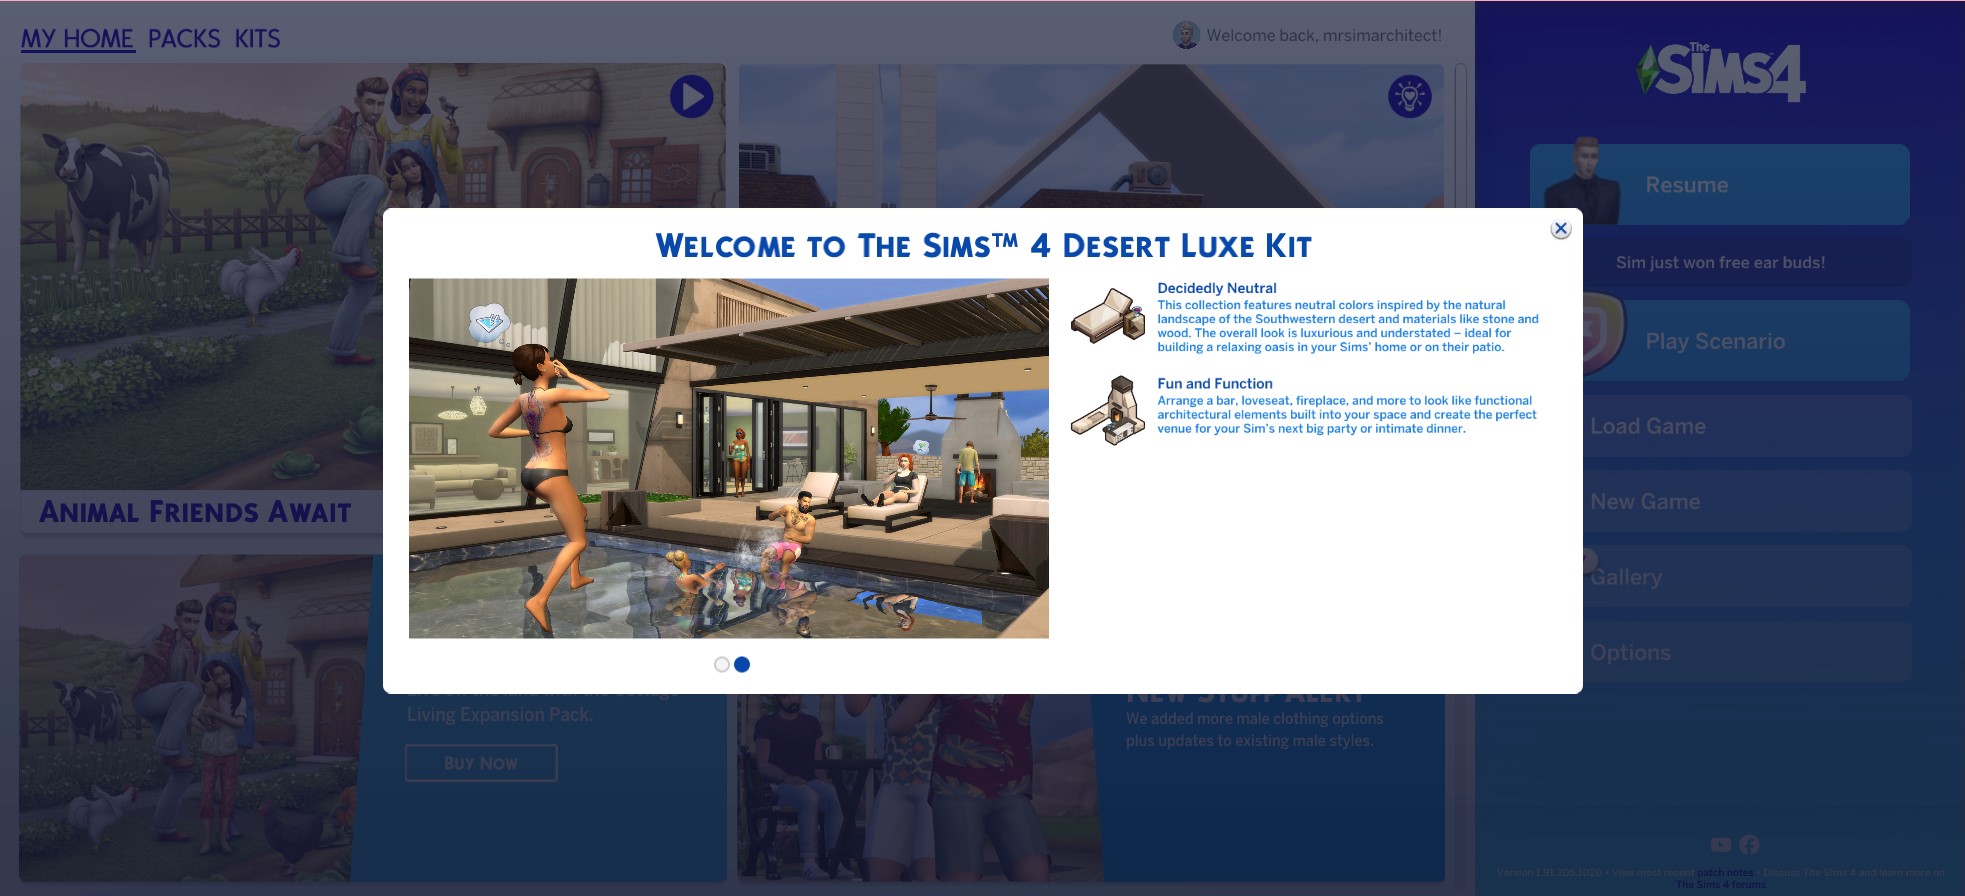 The Sims 4 Desert Luxe Kit Pack - Welcome Notification